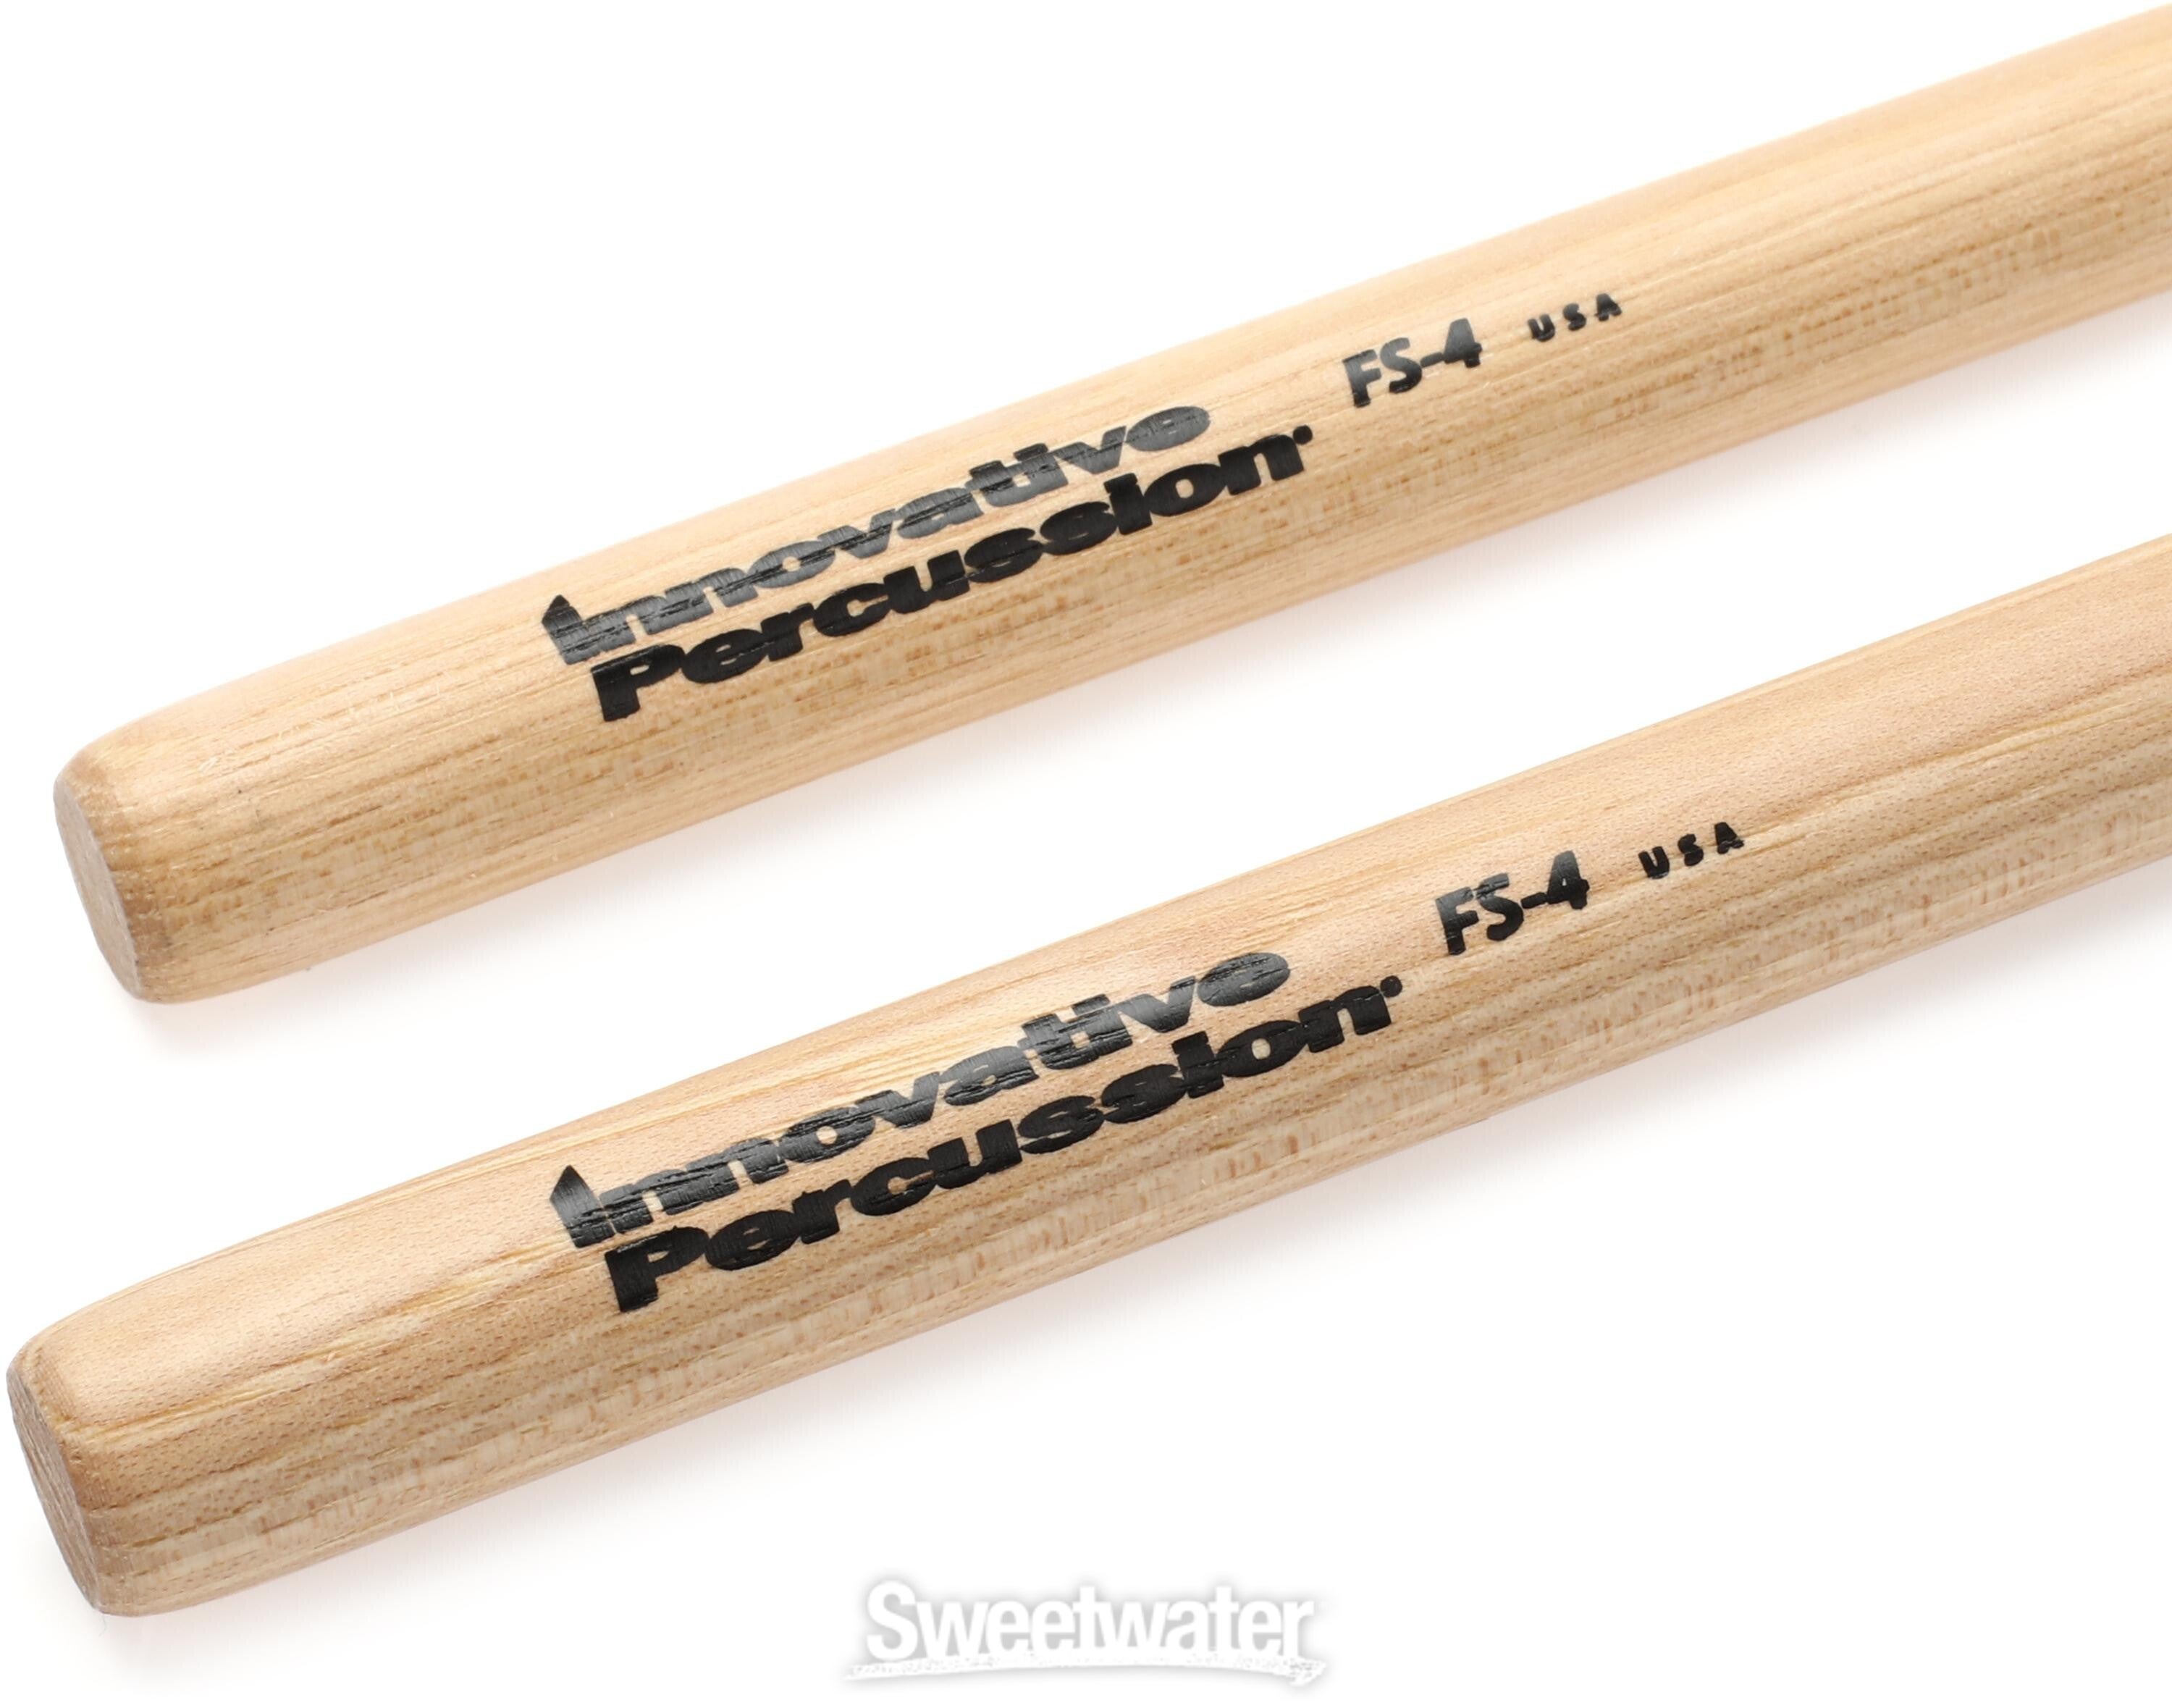 Innovative Percussion FS-4 Field Series Marching Drumsticks